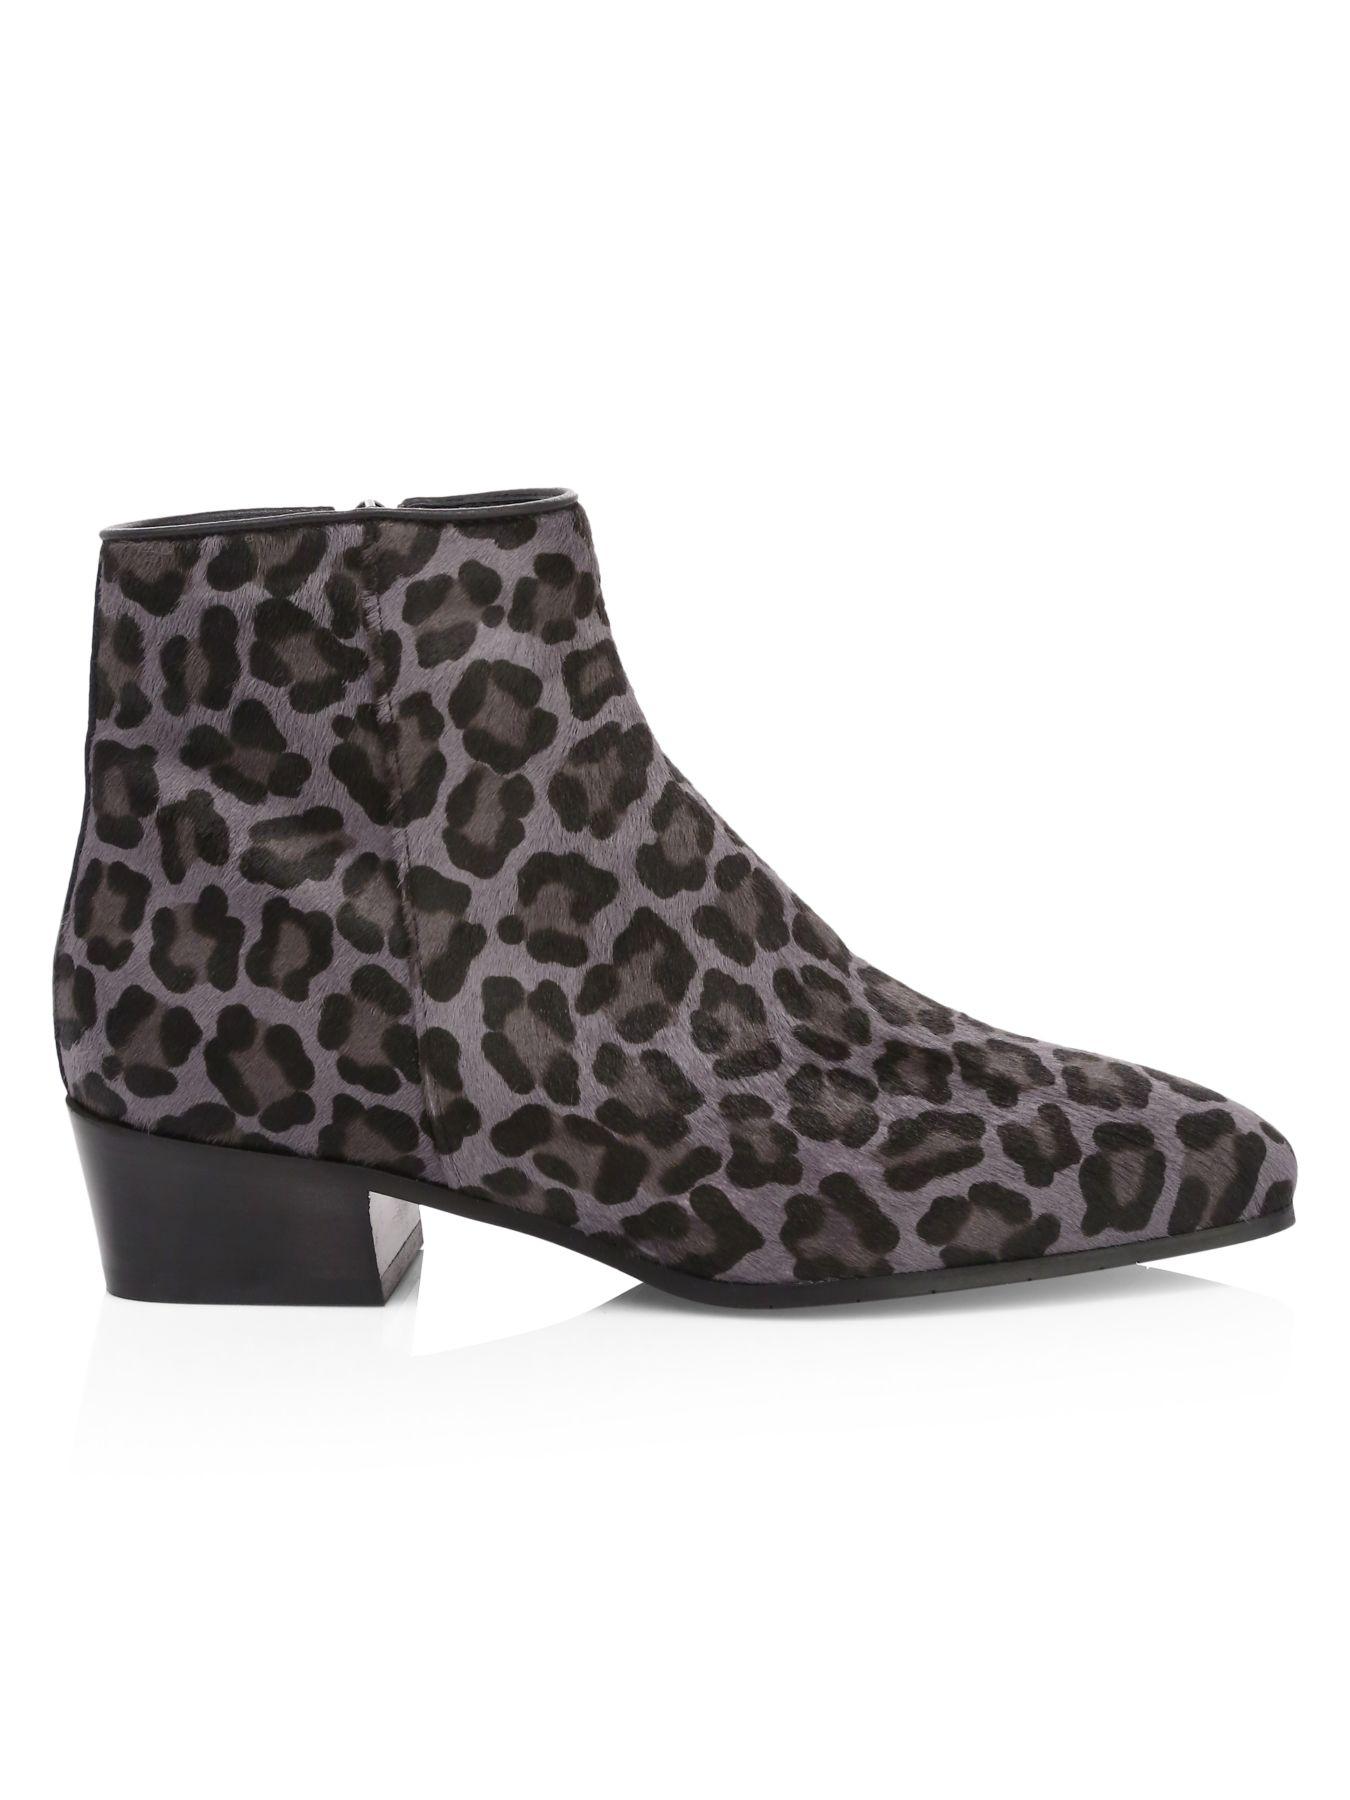 grey leopard print ankle boots